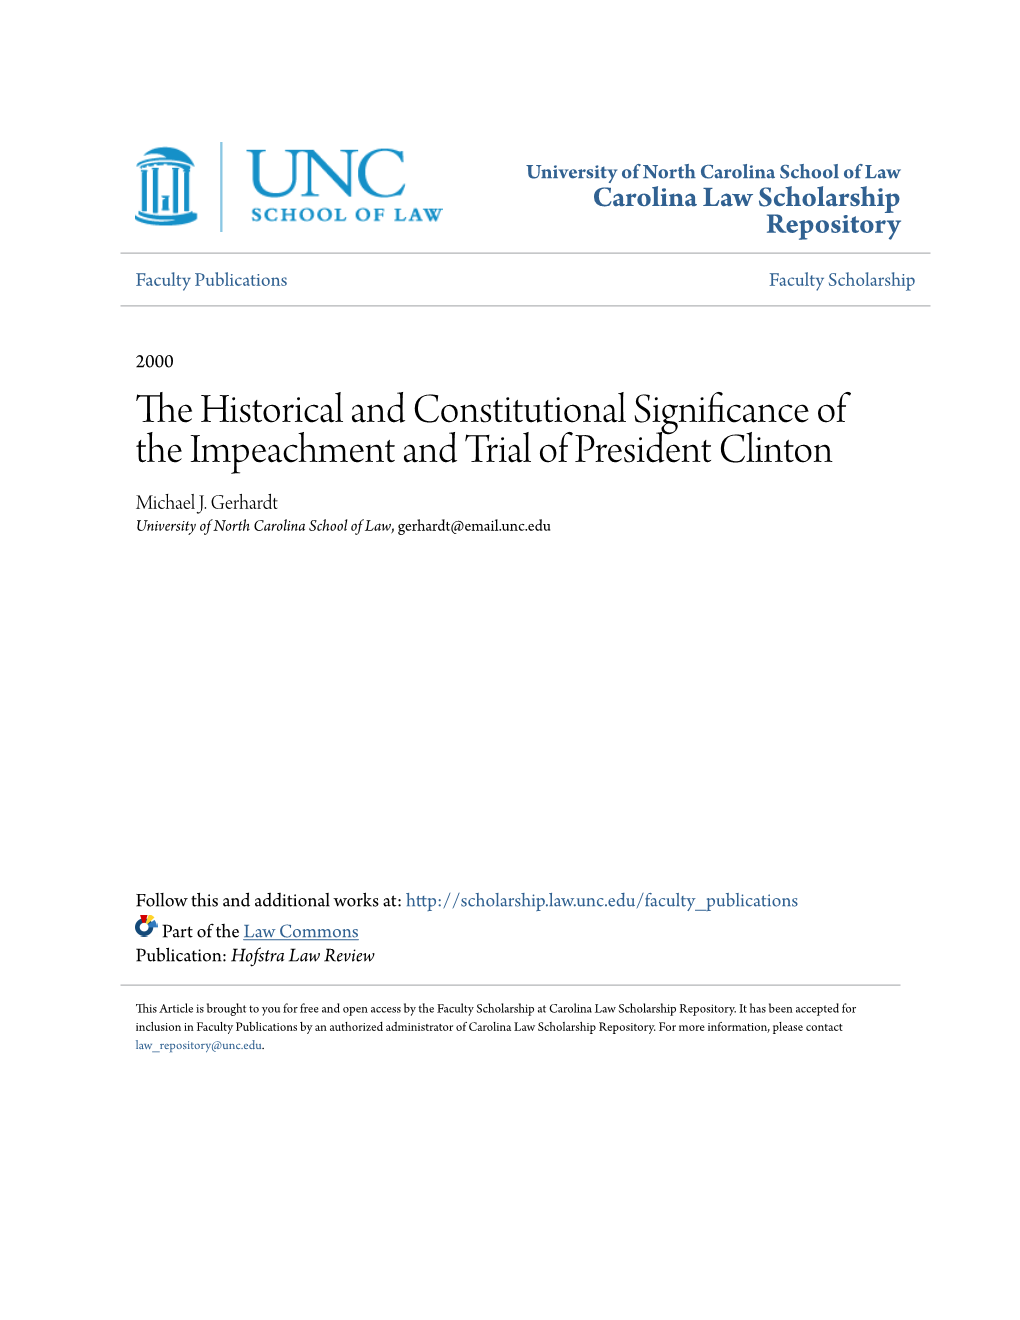 The Historical and Constitutional Significance of the Impeachment